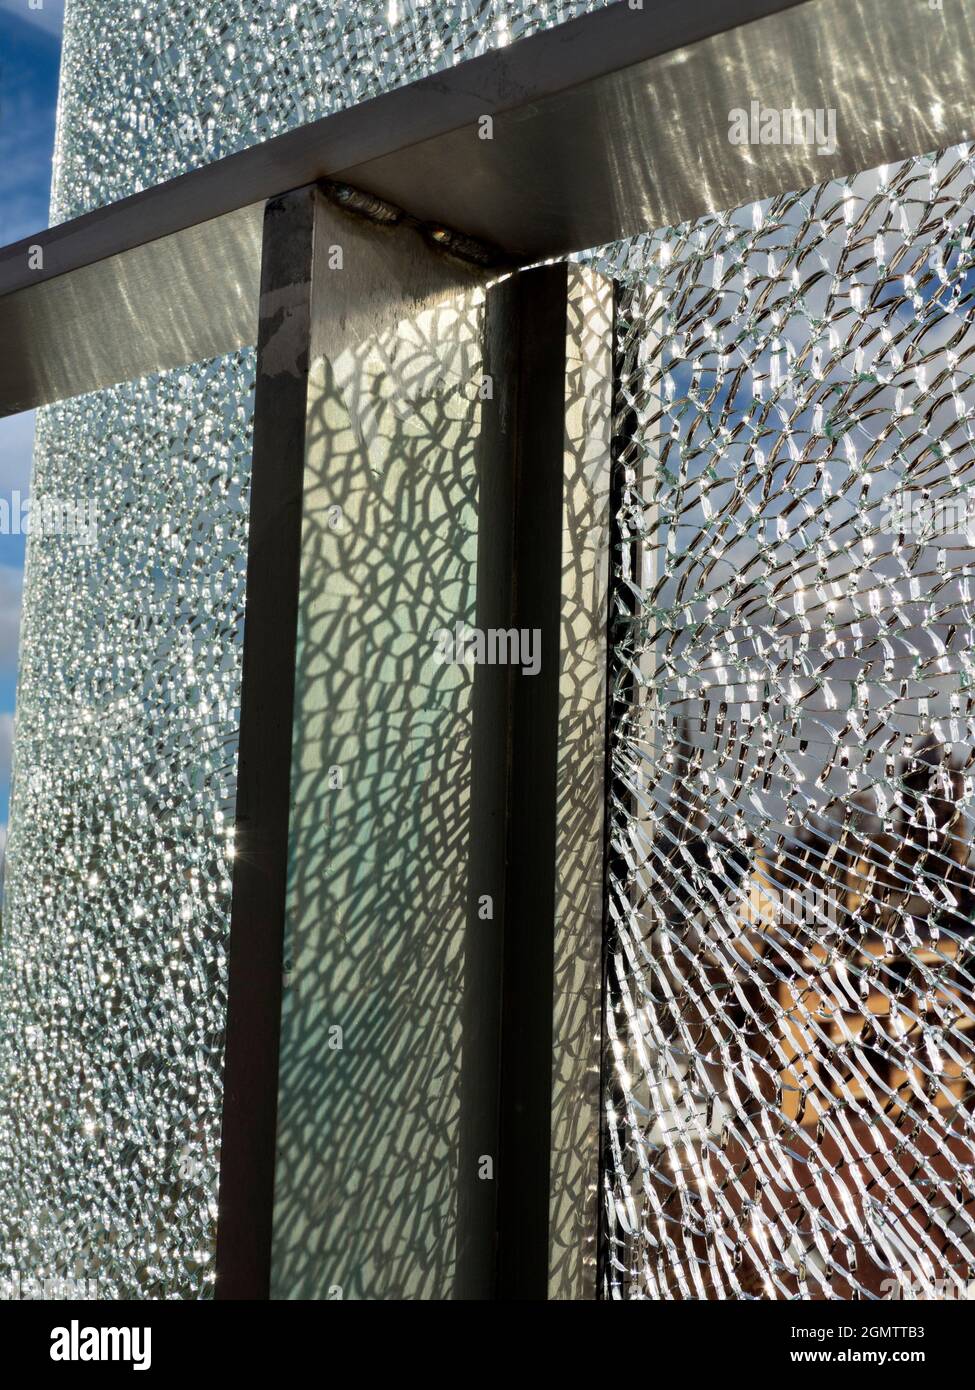 Oxford, England - 25 October 2017 A vandalised glass panel at a bus stop is a surprisingly beautiful thing, with striking abstract patterning. Stock Photo